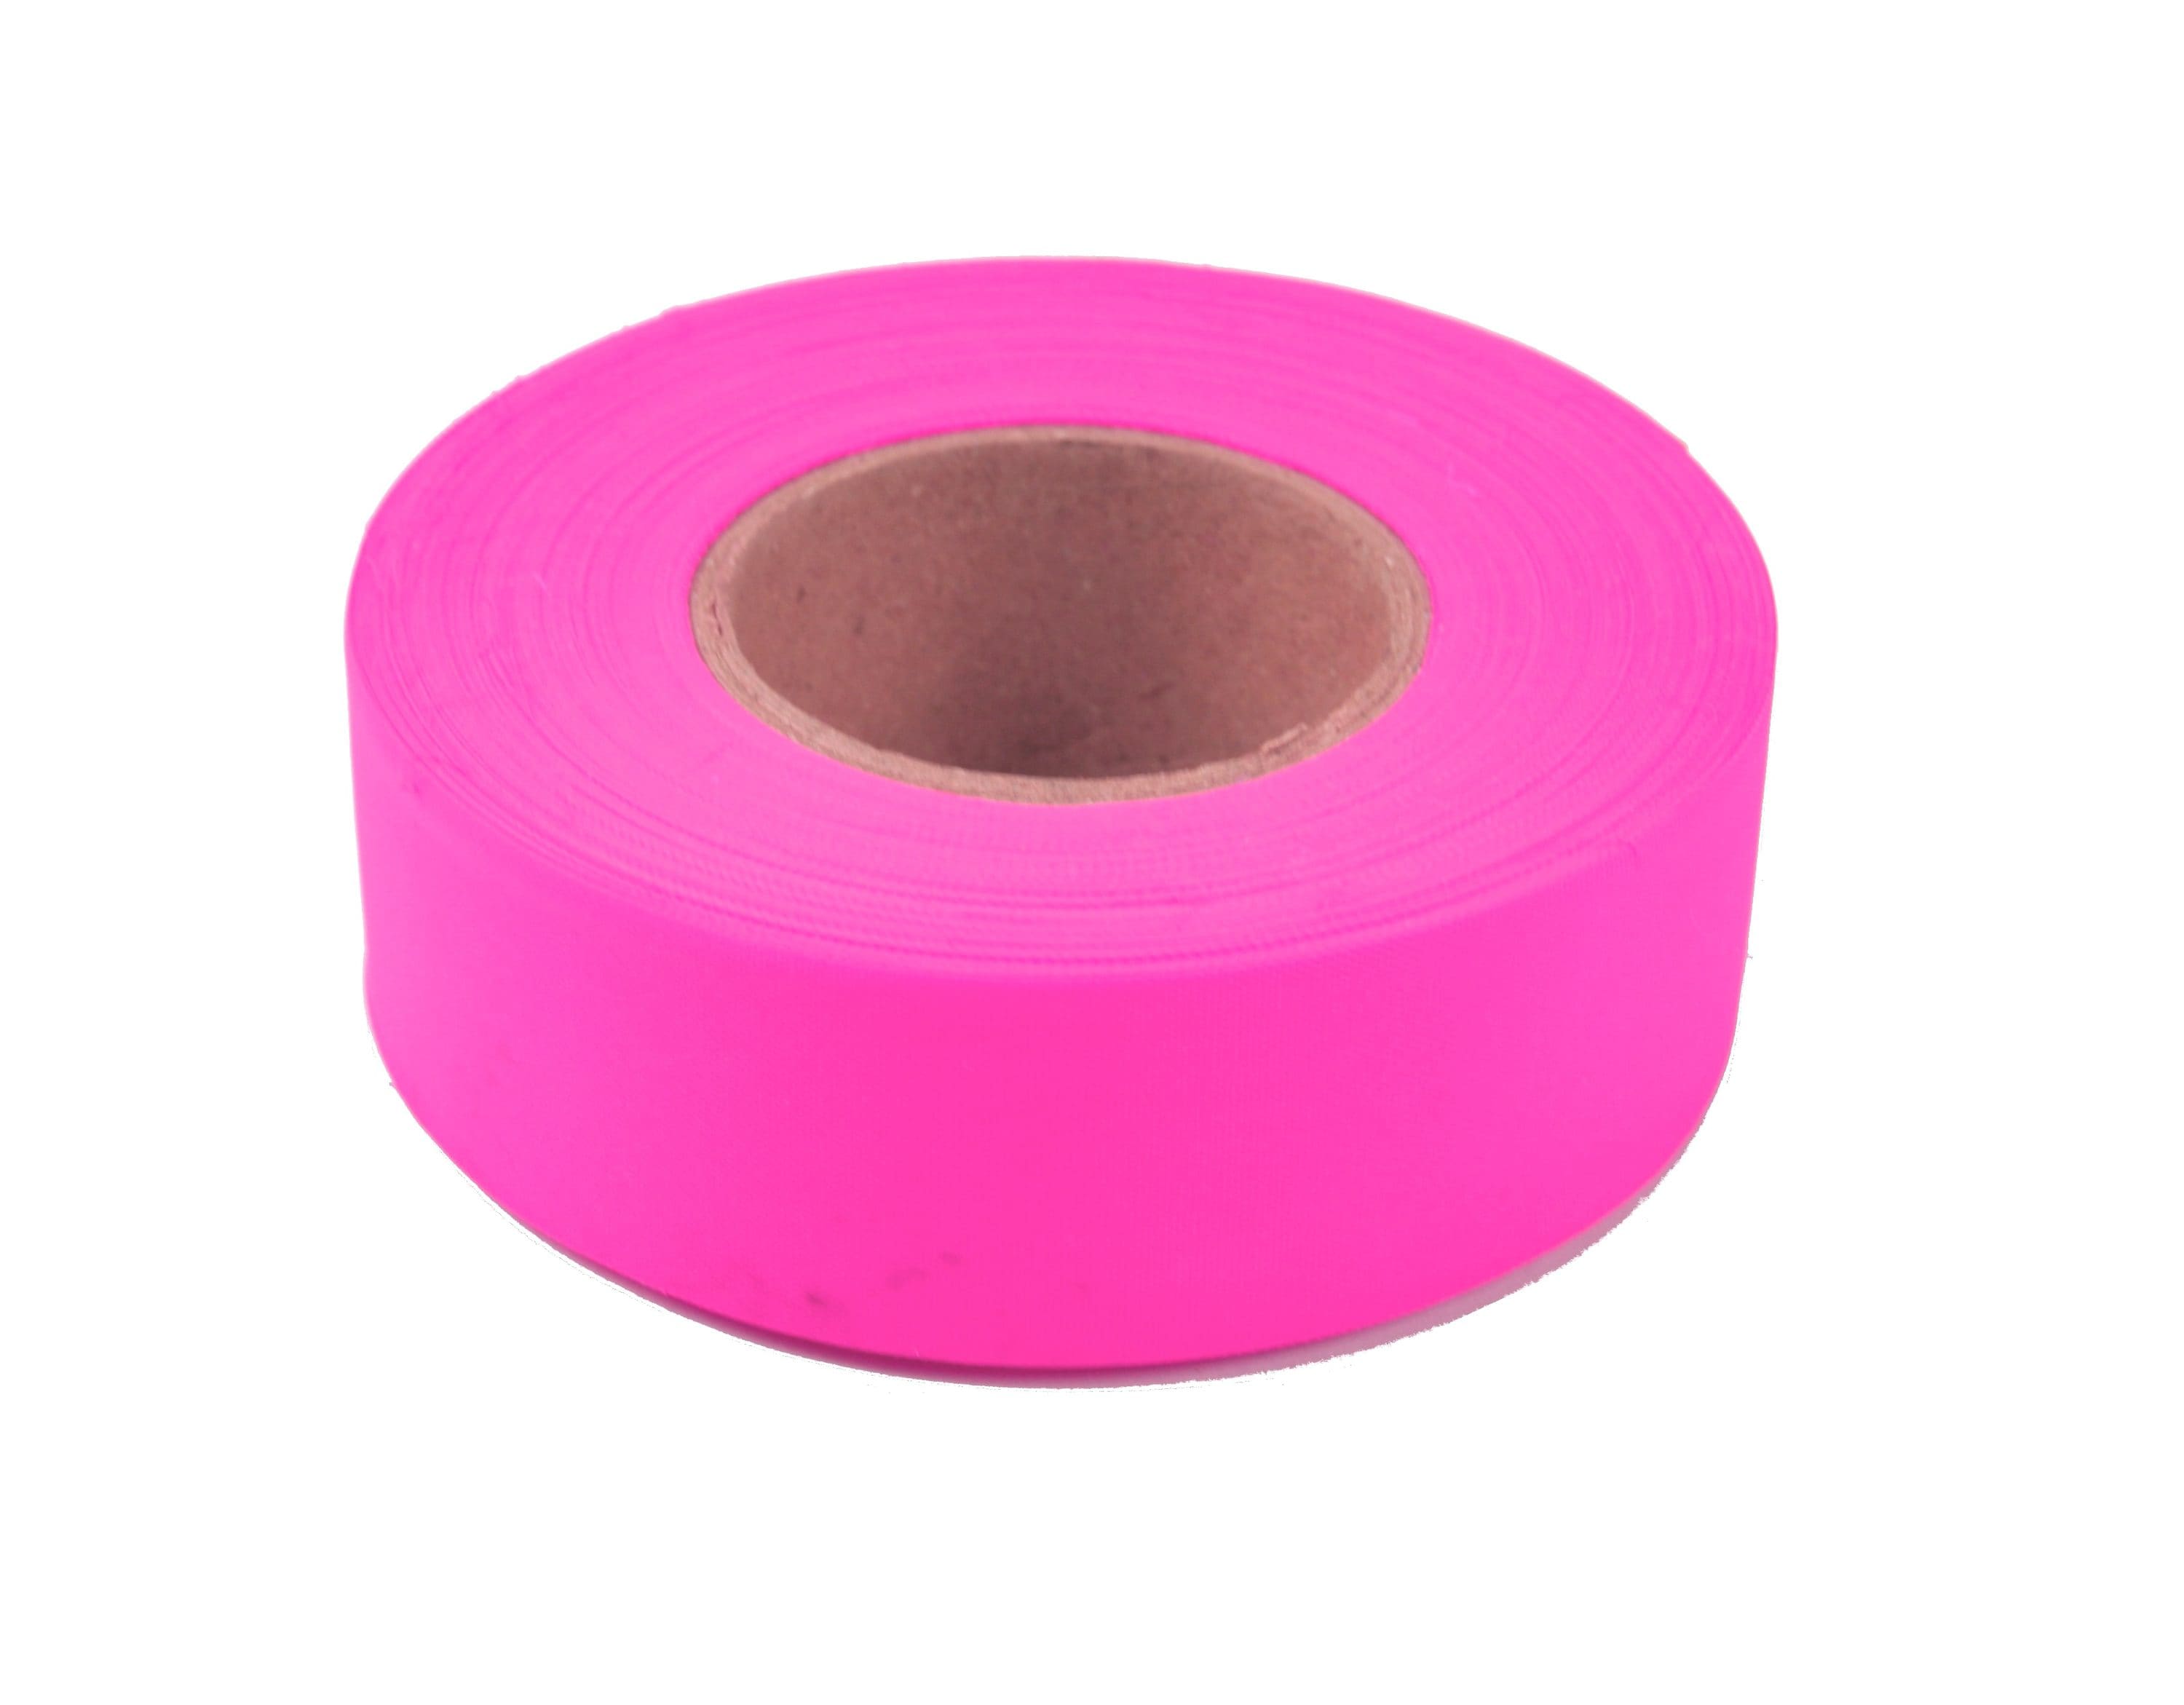 ships free to USA/CAN 2x Flagging Tape Marking Ribbon HIGH VISIBILITY 250' 